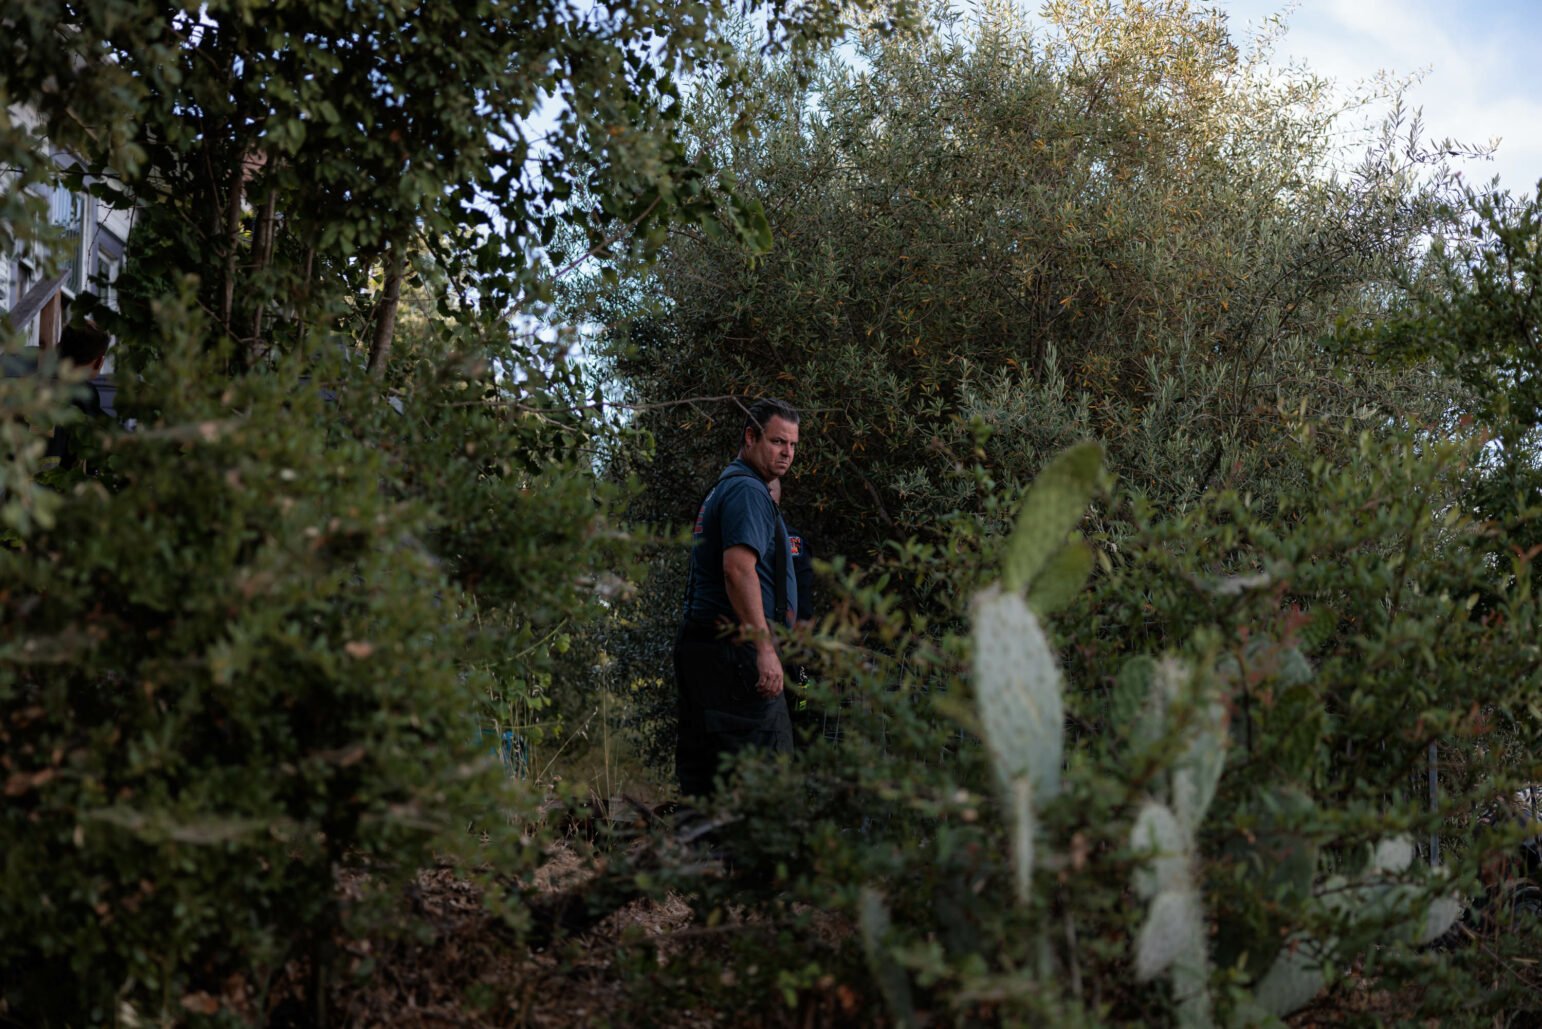 A Vallejo firefighter moving through dense greenery, looking directly at the camera, conveying a sense of alertness and preparedness. The background is lush and green with a hint of residential structures barely visible, so overgrown is the vacant property in the background.